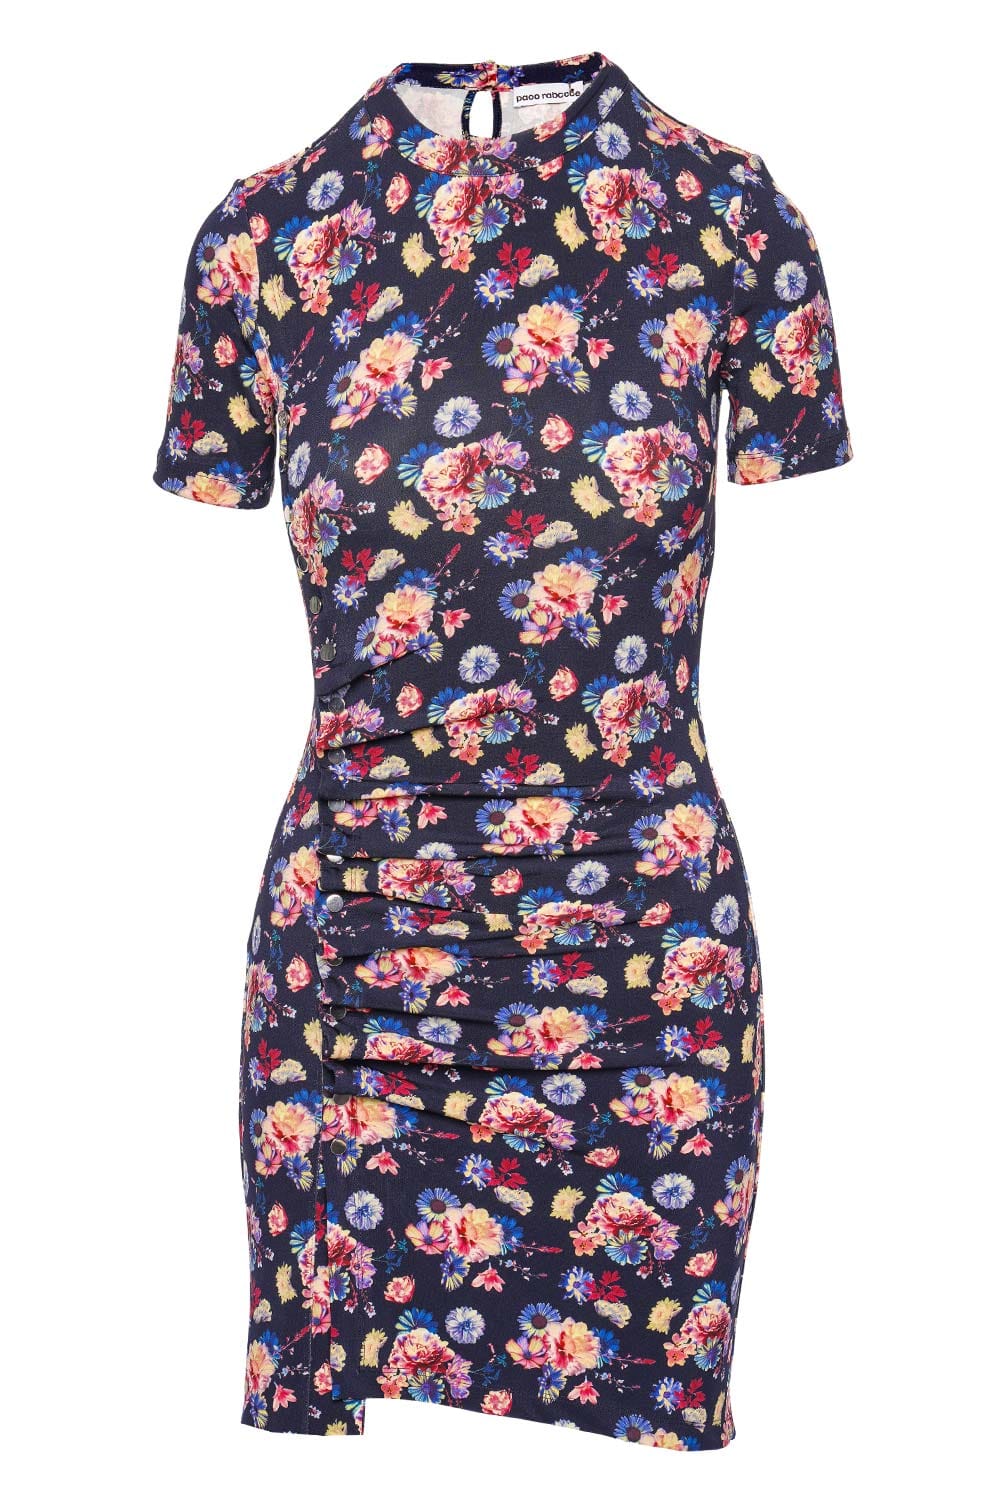 Paco Rabanne Navy Floral Ruched Mini Dress